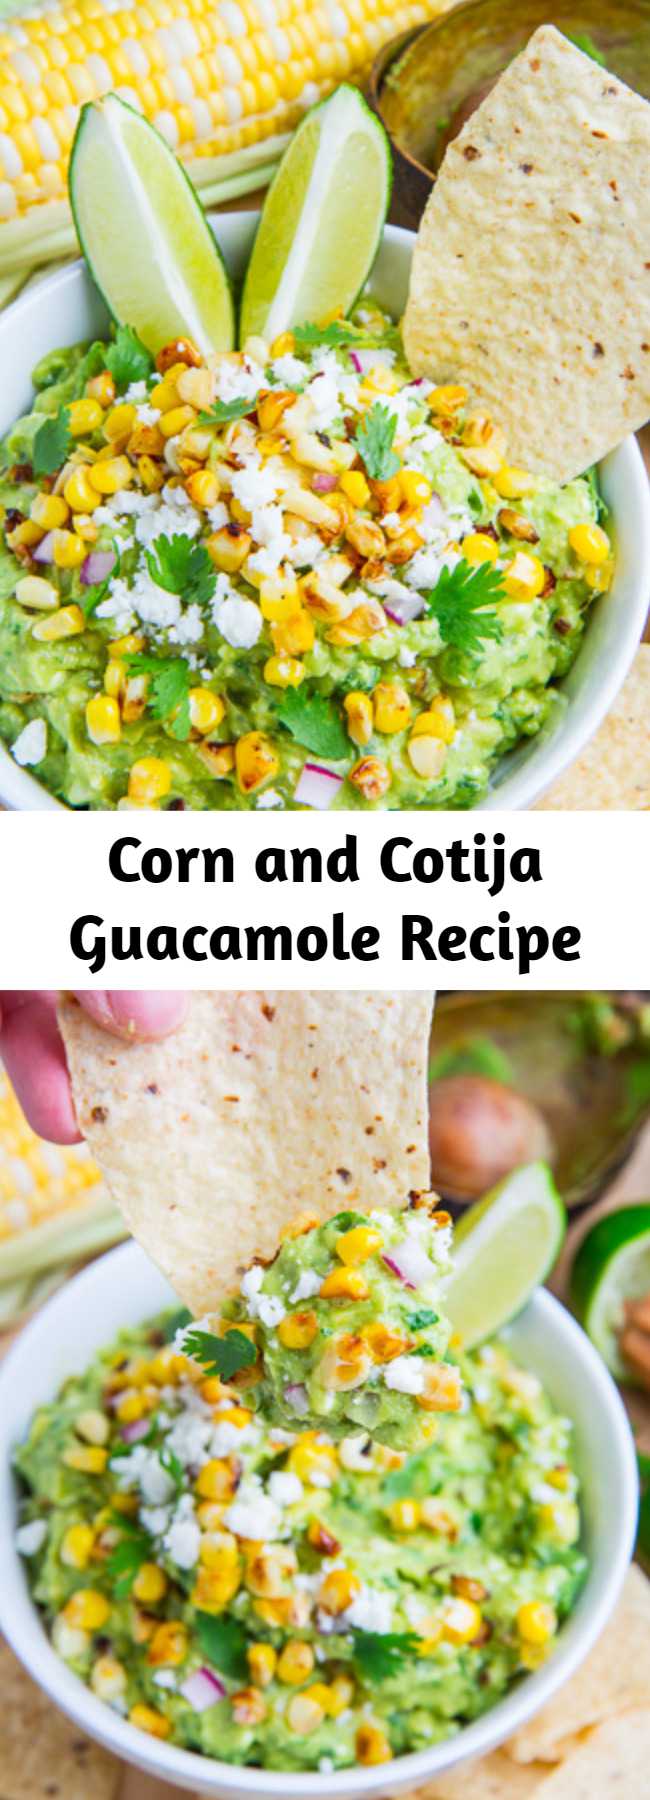 Corn and Cotija Guacamole Recipe - A guacamole inspired by esquites, aka Mexican corn salad, with charred or grilled corn and crumbled cotija. This corn and cotija guacamole makes for an amazing addition to any summer getogether and it is sure to disappear quickly so make a lot of it!